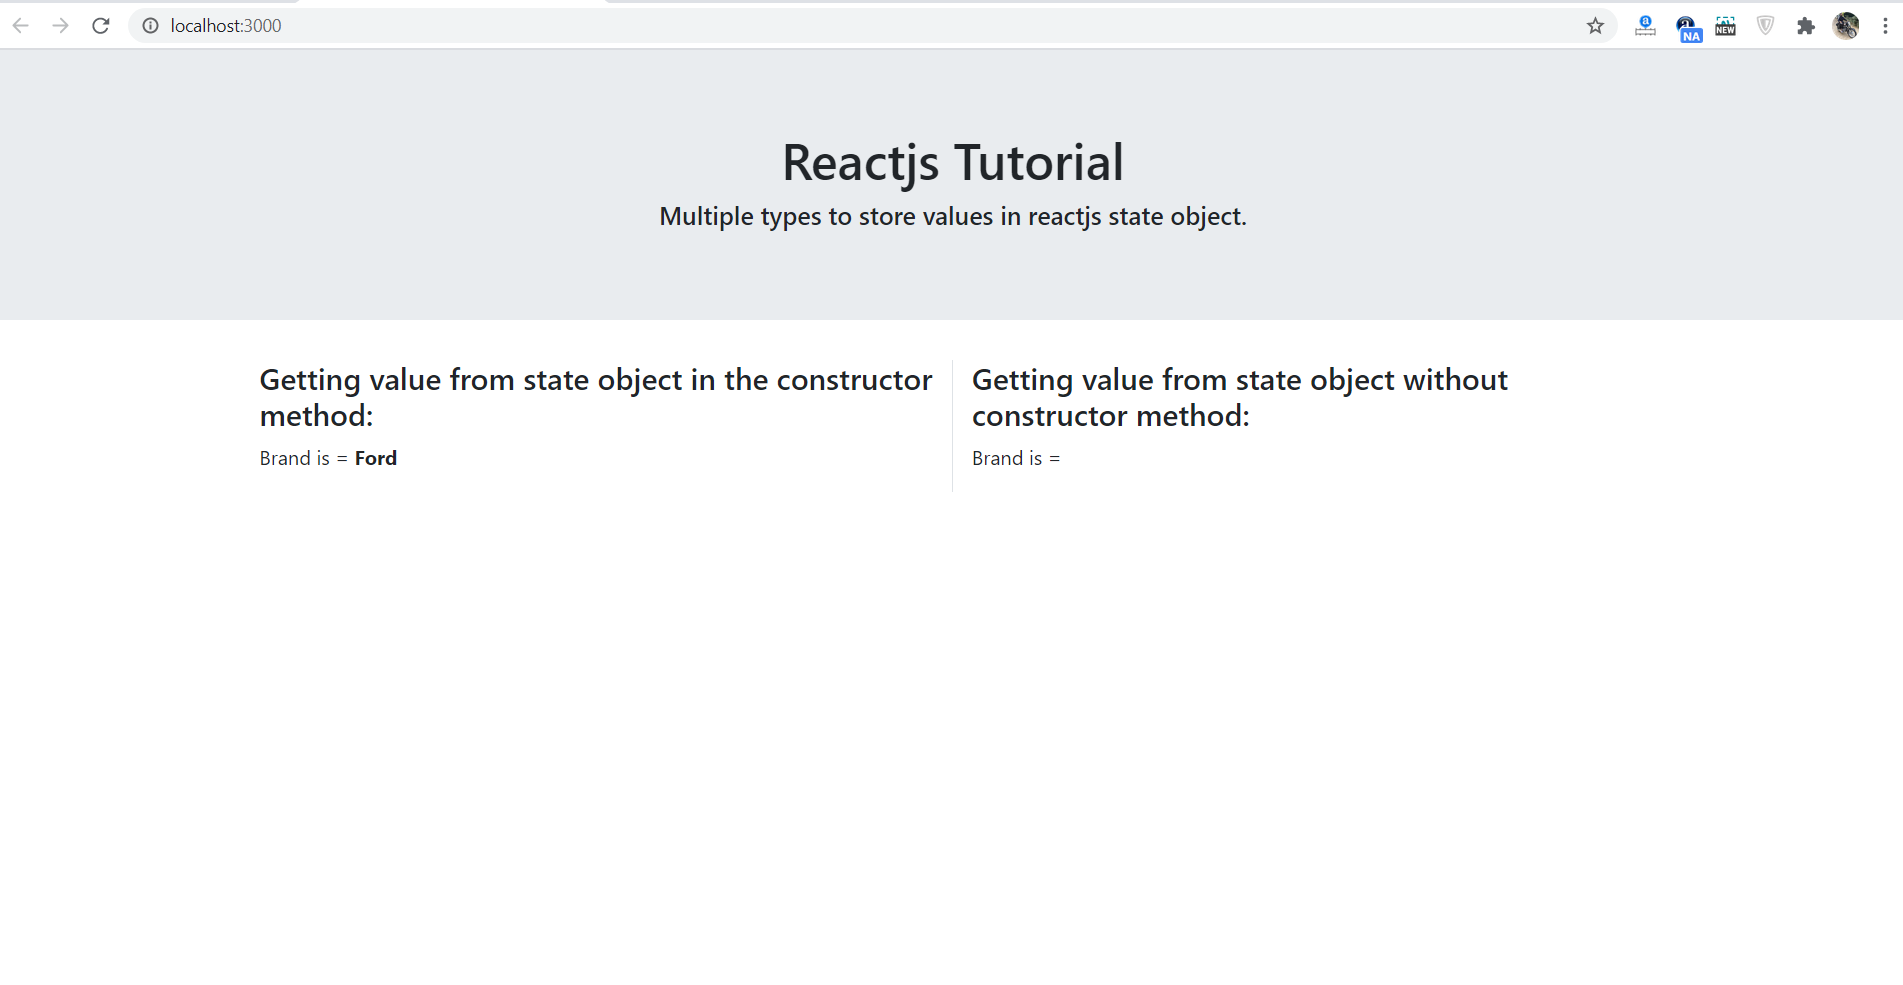 Multiple Types to Store Values in Reactjs State Object